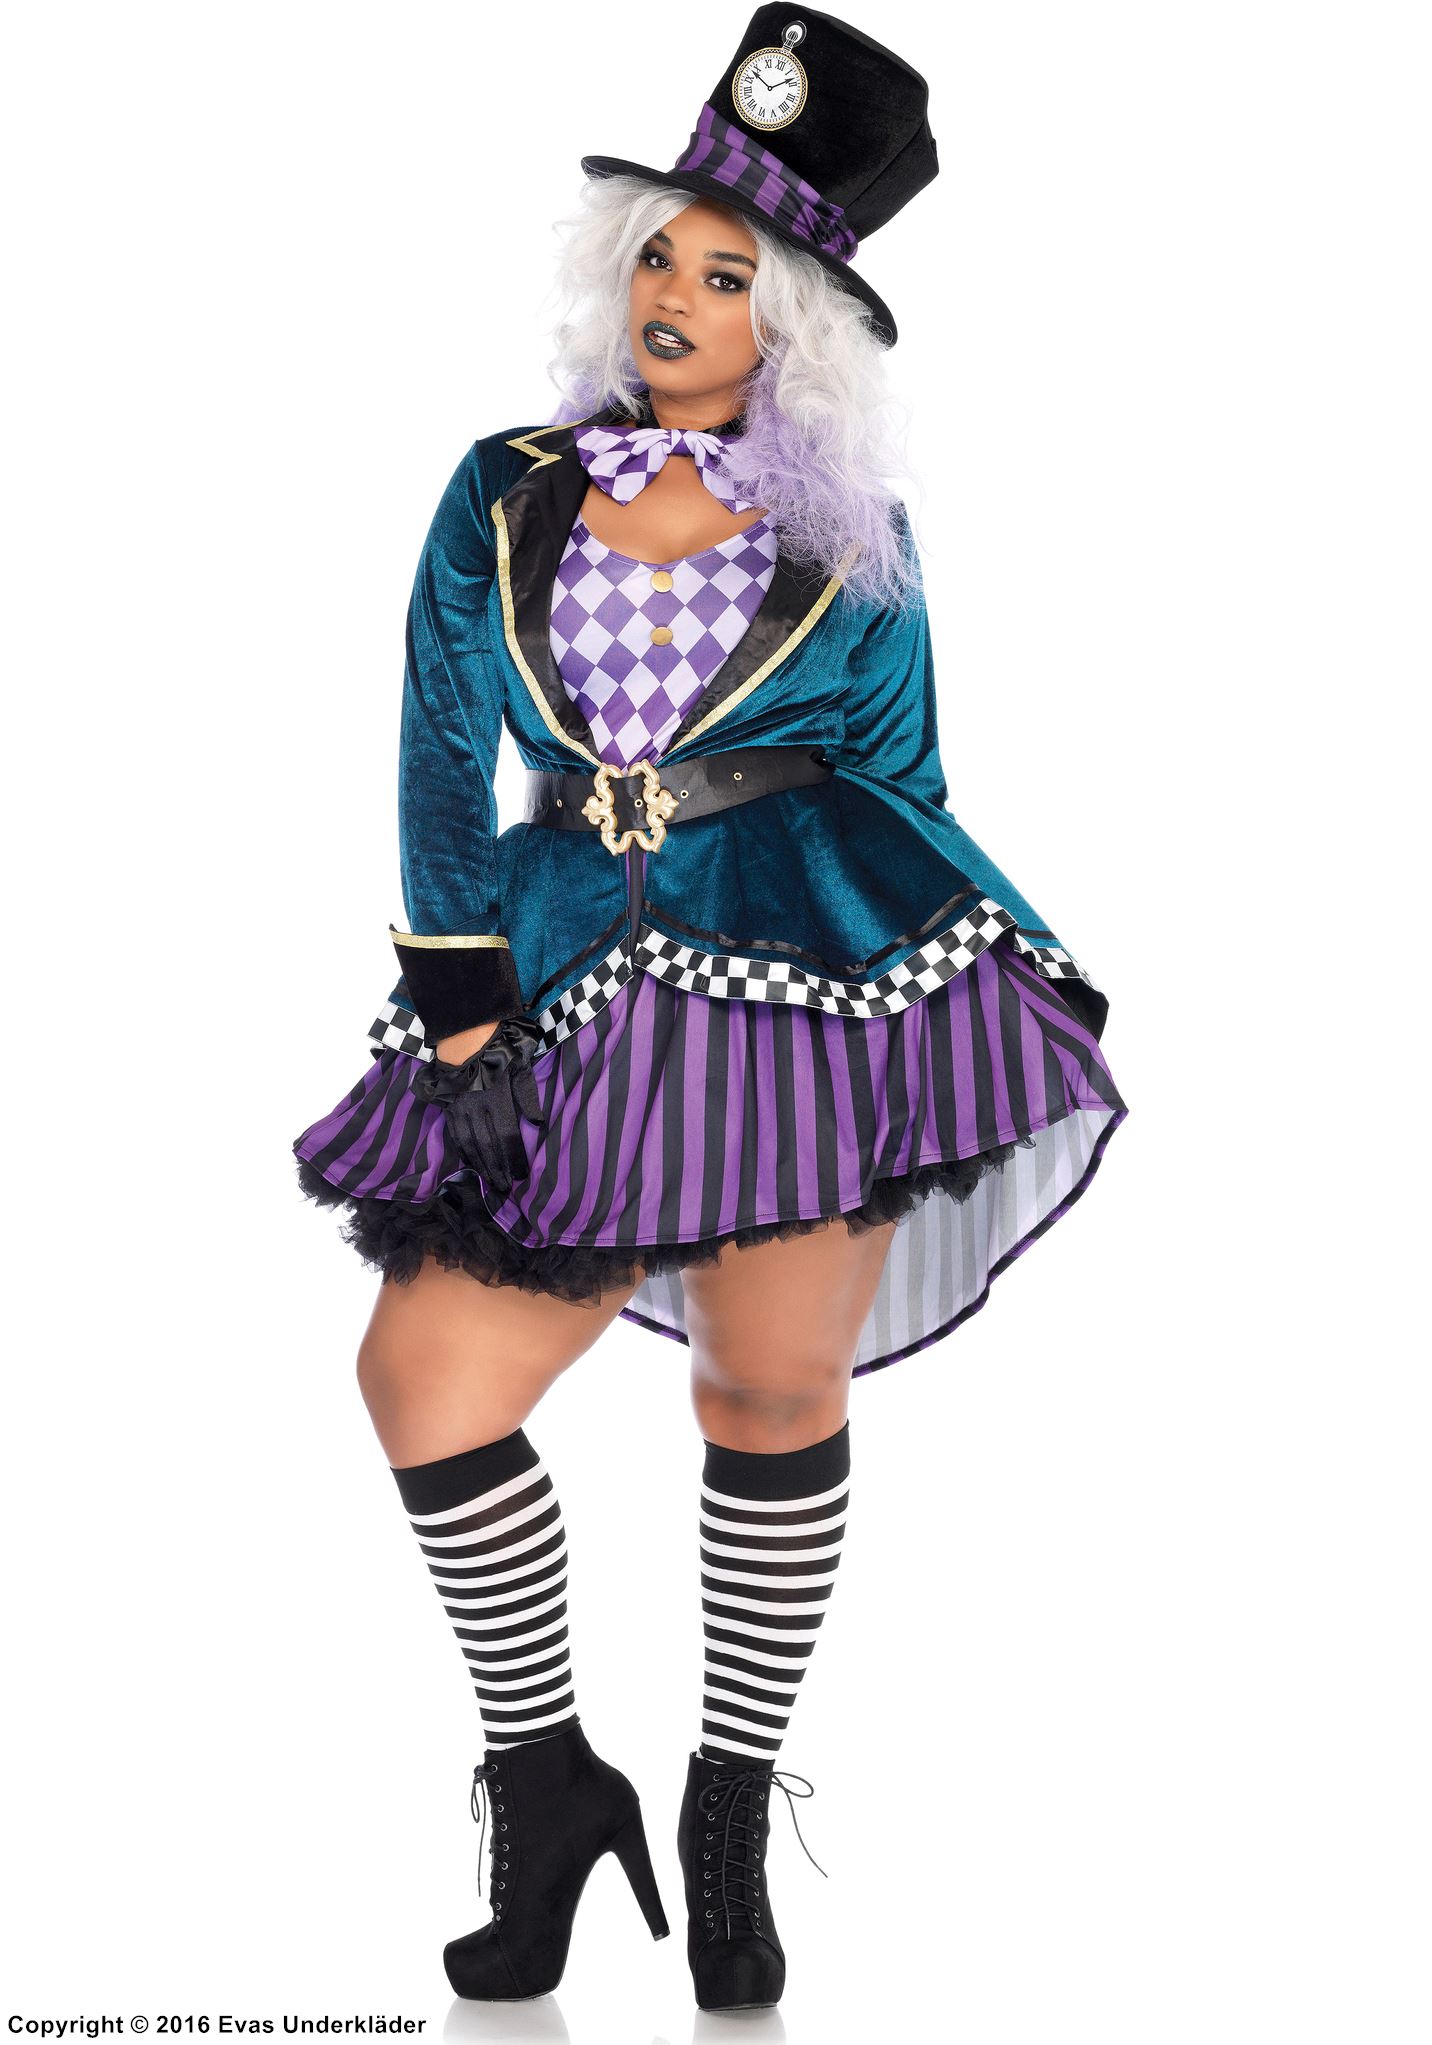 Female Mad Hatter, costume dress, long sleeves, belt, checkered pattern, XL to 4XL